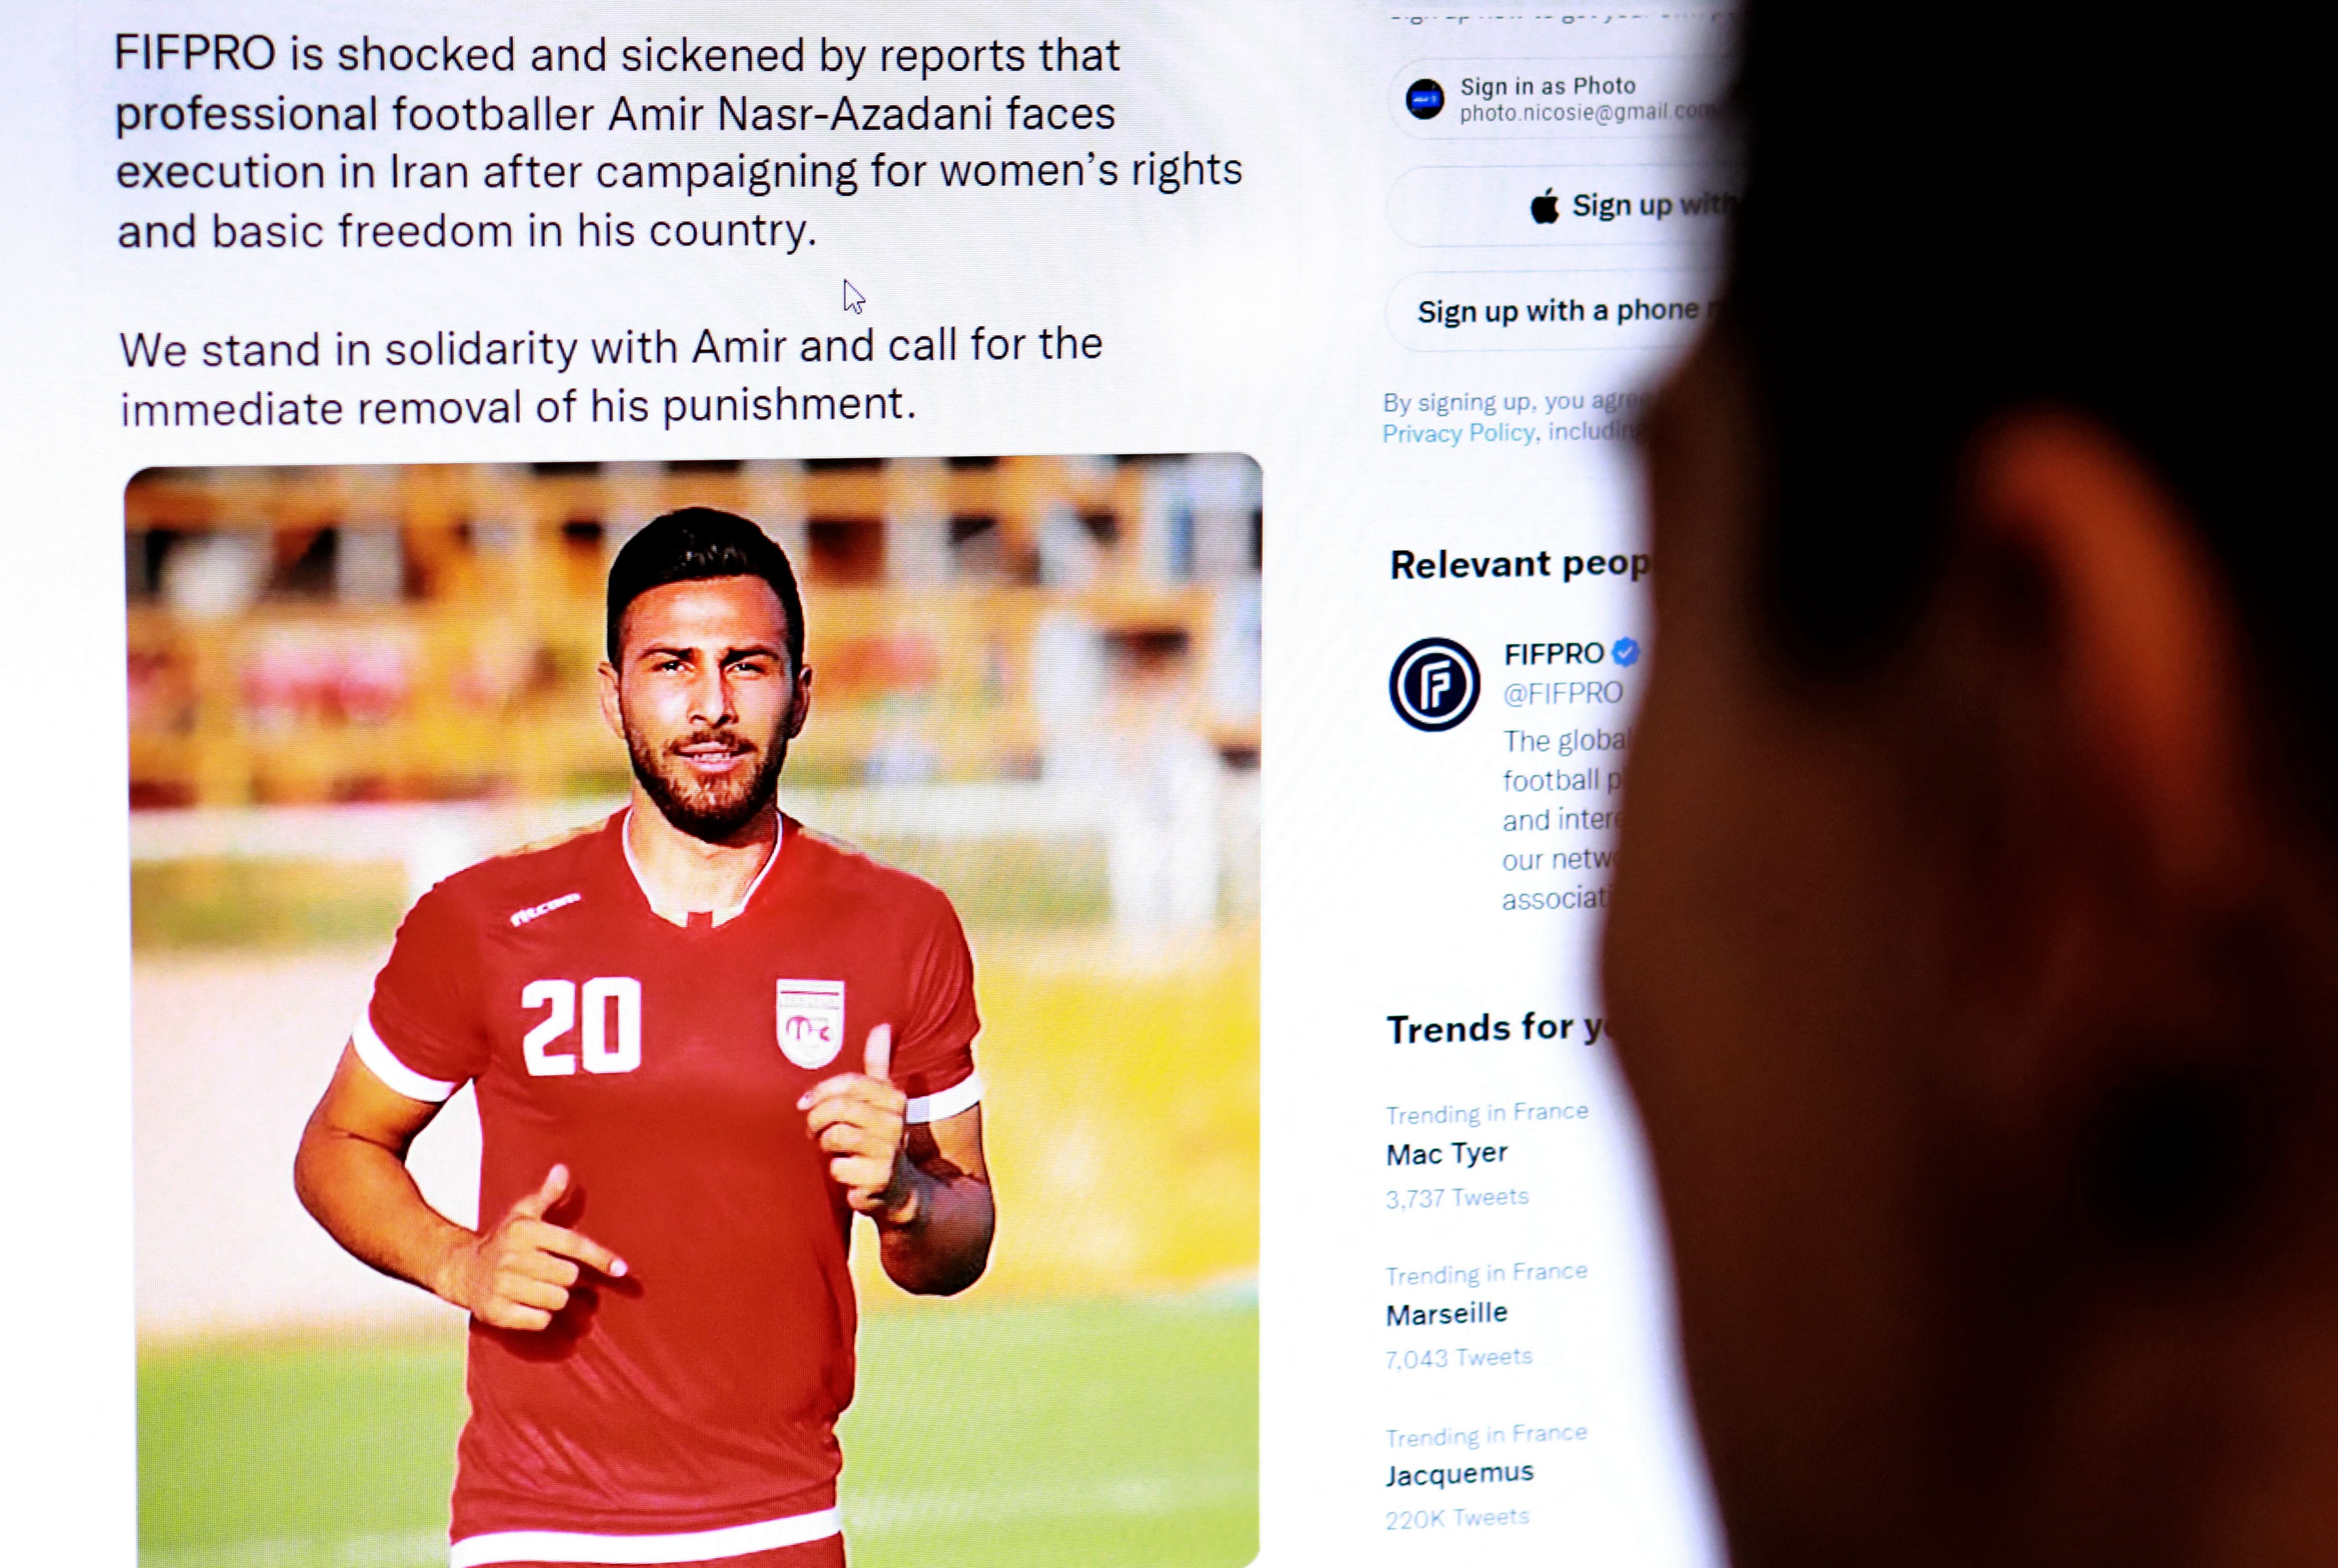 Fifpro put out a tweet in support of Amir Nasr-Azadani